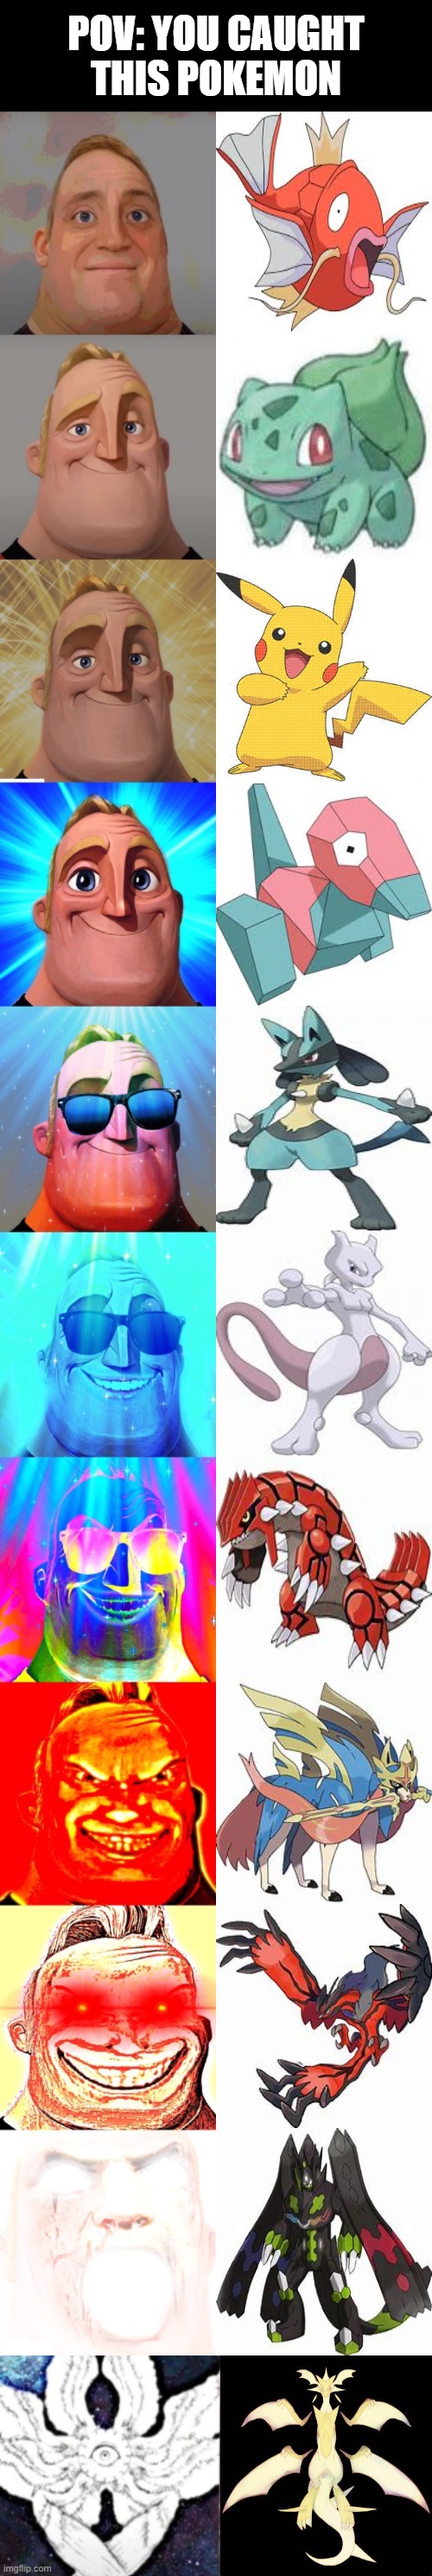  POV: YOU CAUGHT THIS POKEMON | image tagged in mr incredible becoming canny,pokemon,pokememes,memes | made w/ Imgflip meme maker